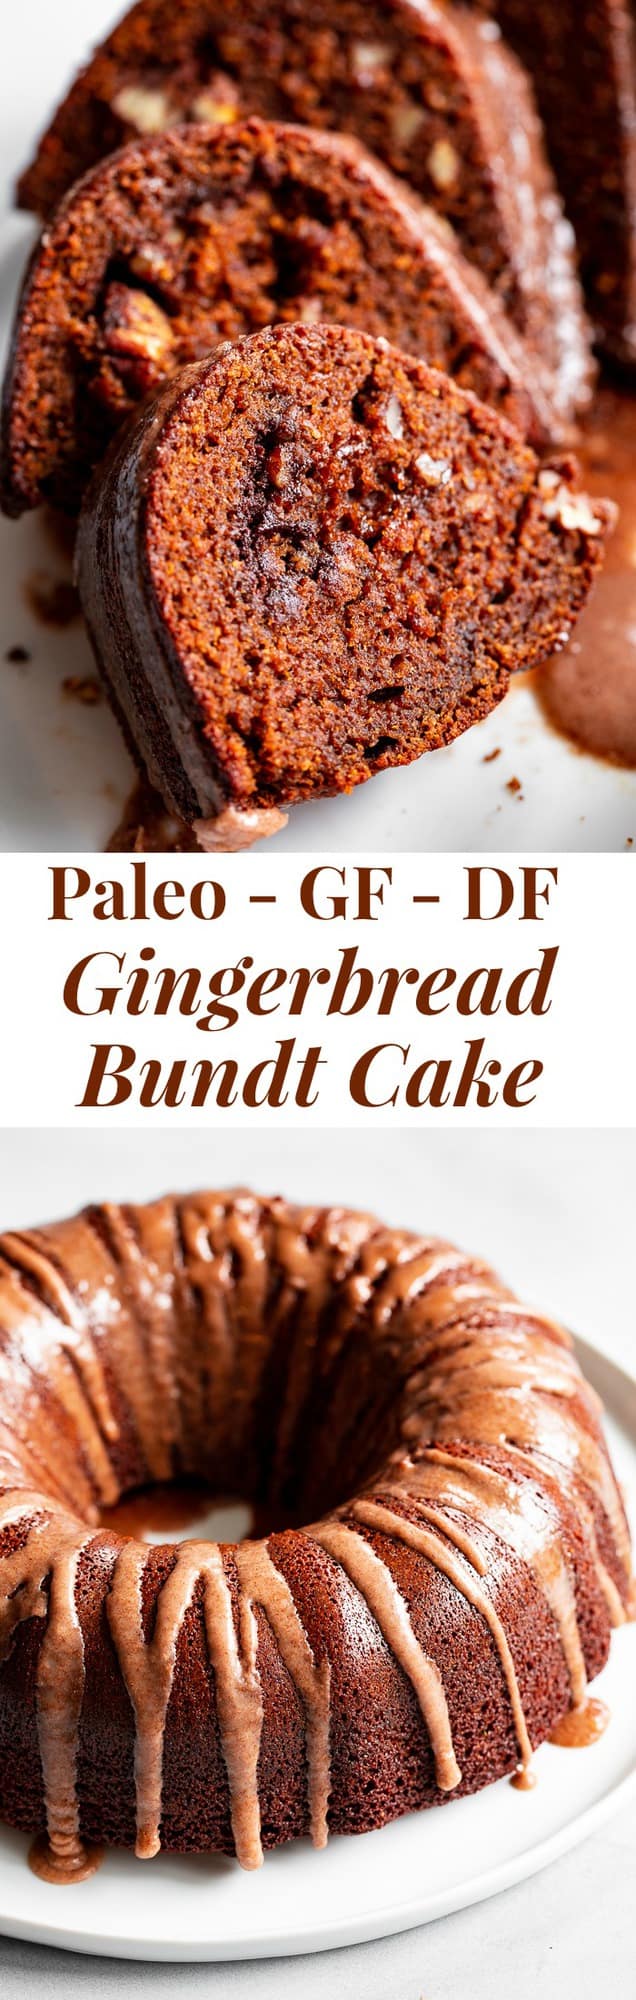 This grain free and paleo Gingerbread Bundt Cake is moist and tender, with a sweet cinnamon maple pecan swirl!  Topped with a sweet maple glaze, this gluten-free, dairy-free cake is sure to be a favorite for the holiday season!